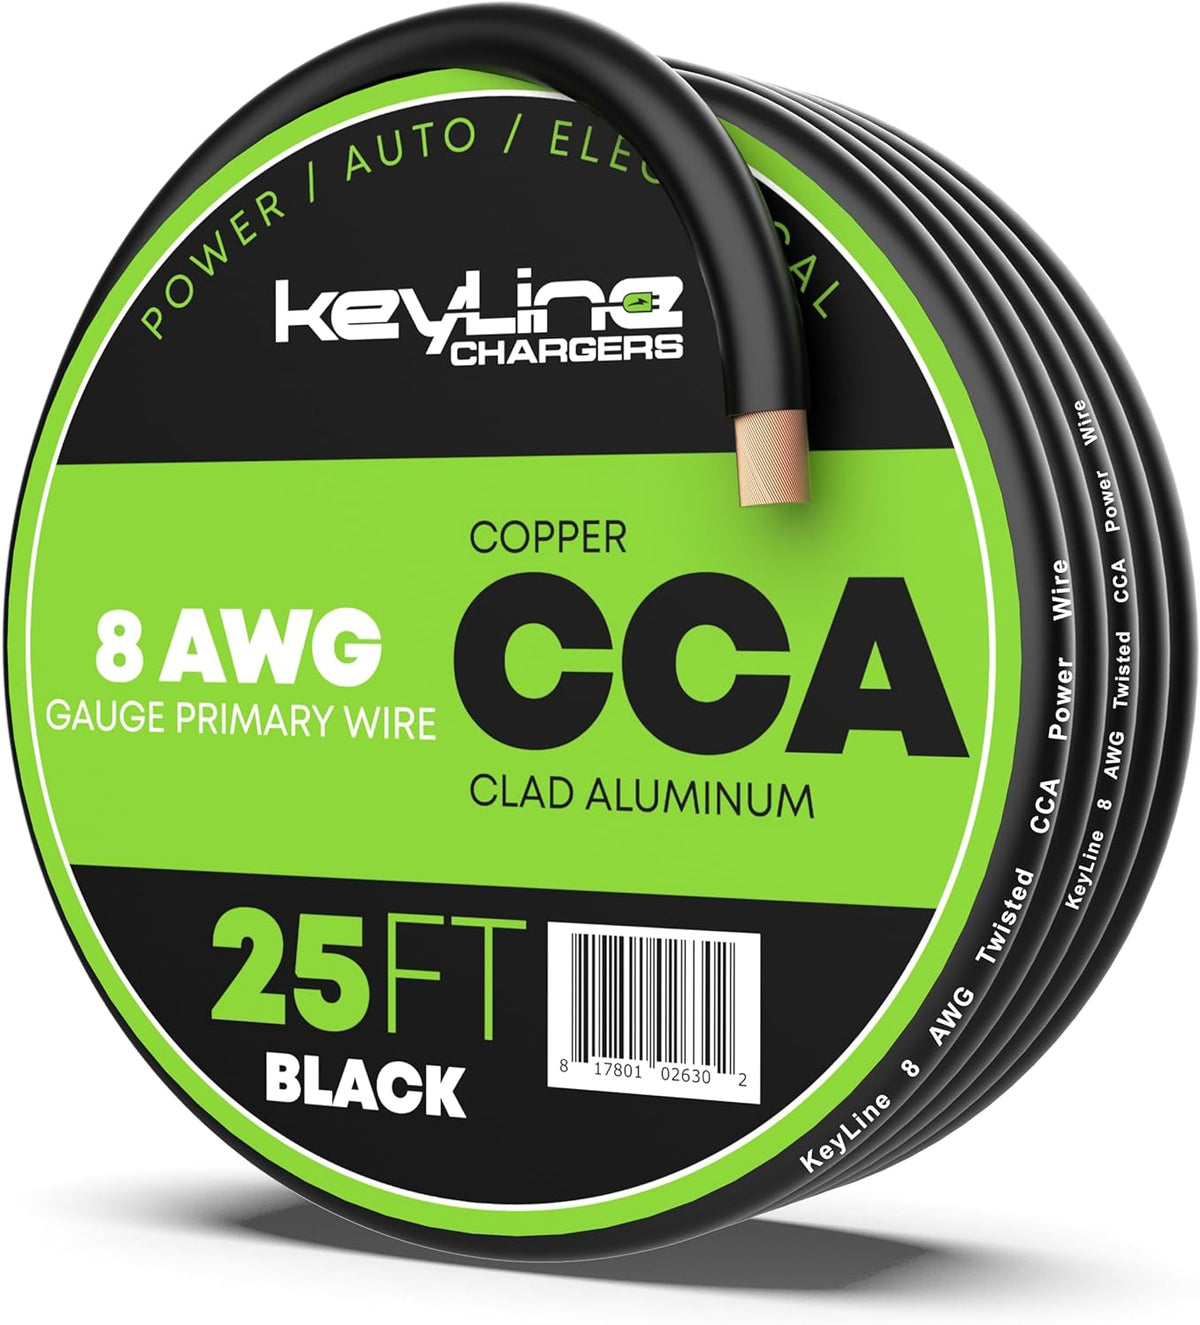 8 Gauge Wire - 25ft Black | 8 Gauge Amp Wire, Battery Cable, Marine Speaker Wire, Solar Cables for RV Trailer, Car Audio Speaker Cable, 8 AWG Automotive Wire Copper Clad Aluminum (CCA)